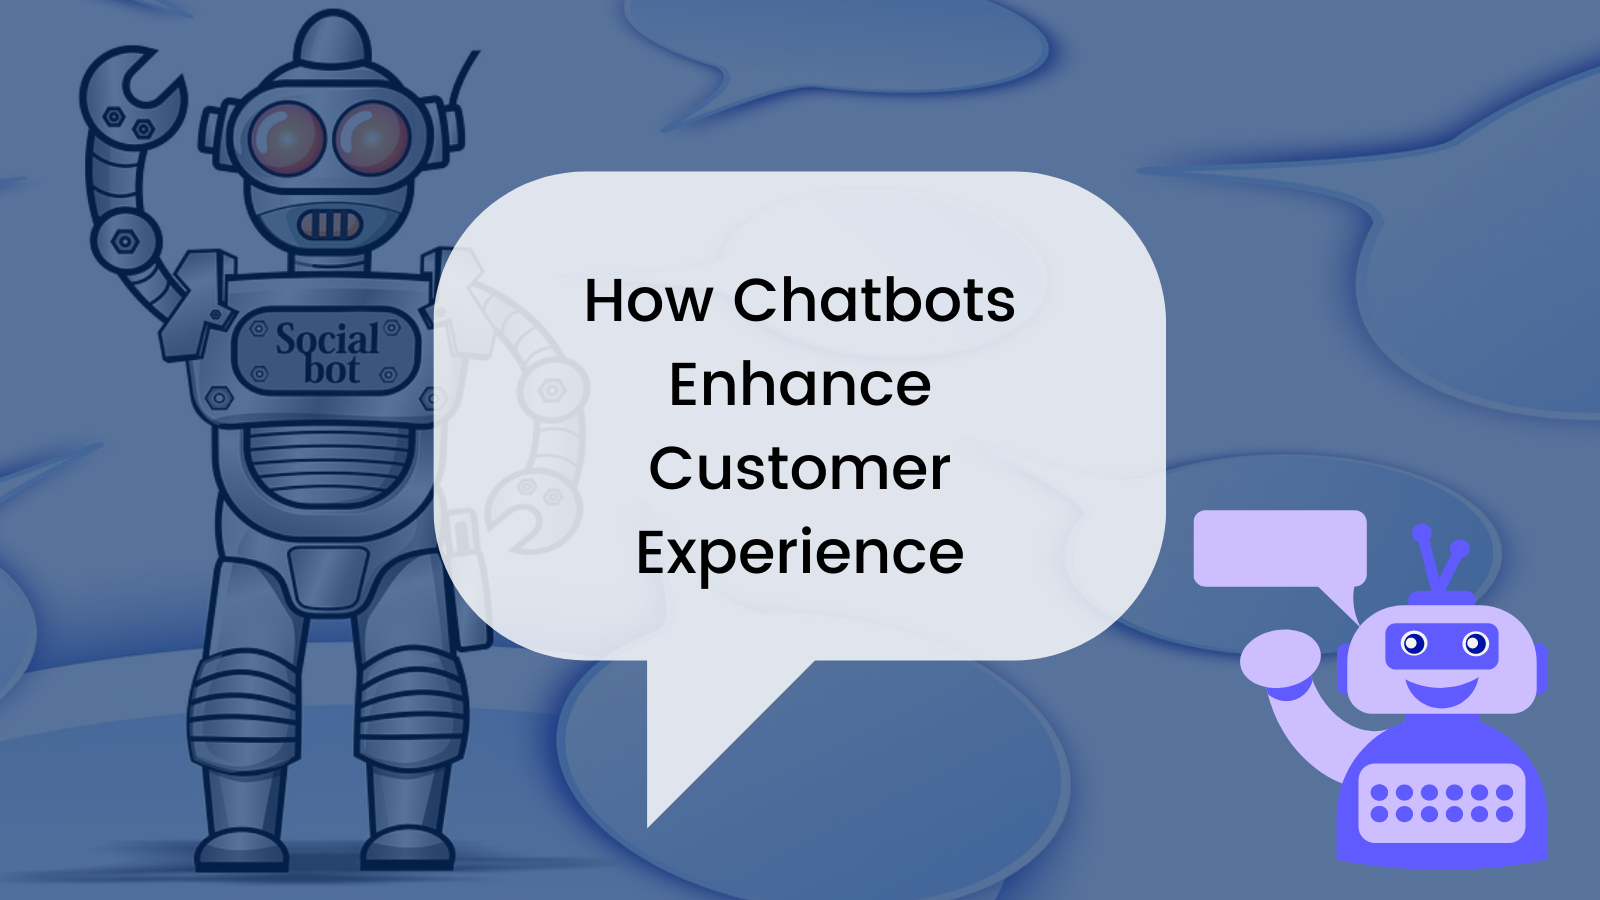 How Chatbots Enhance Customer Experience